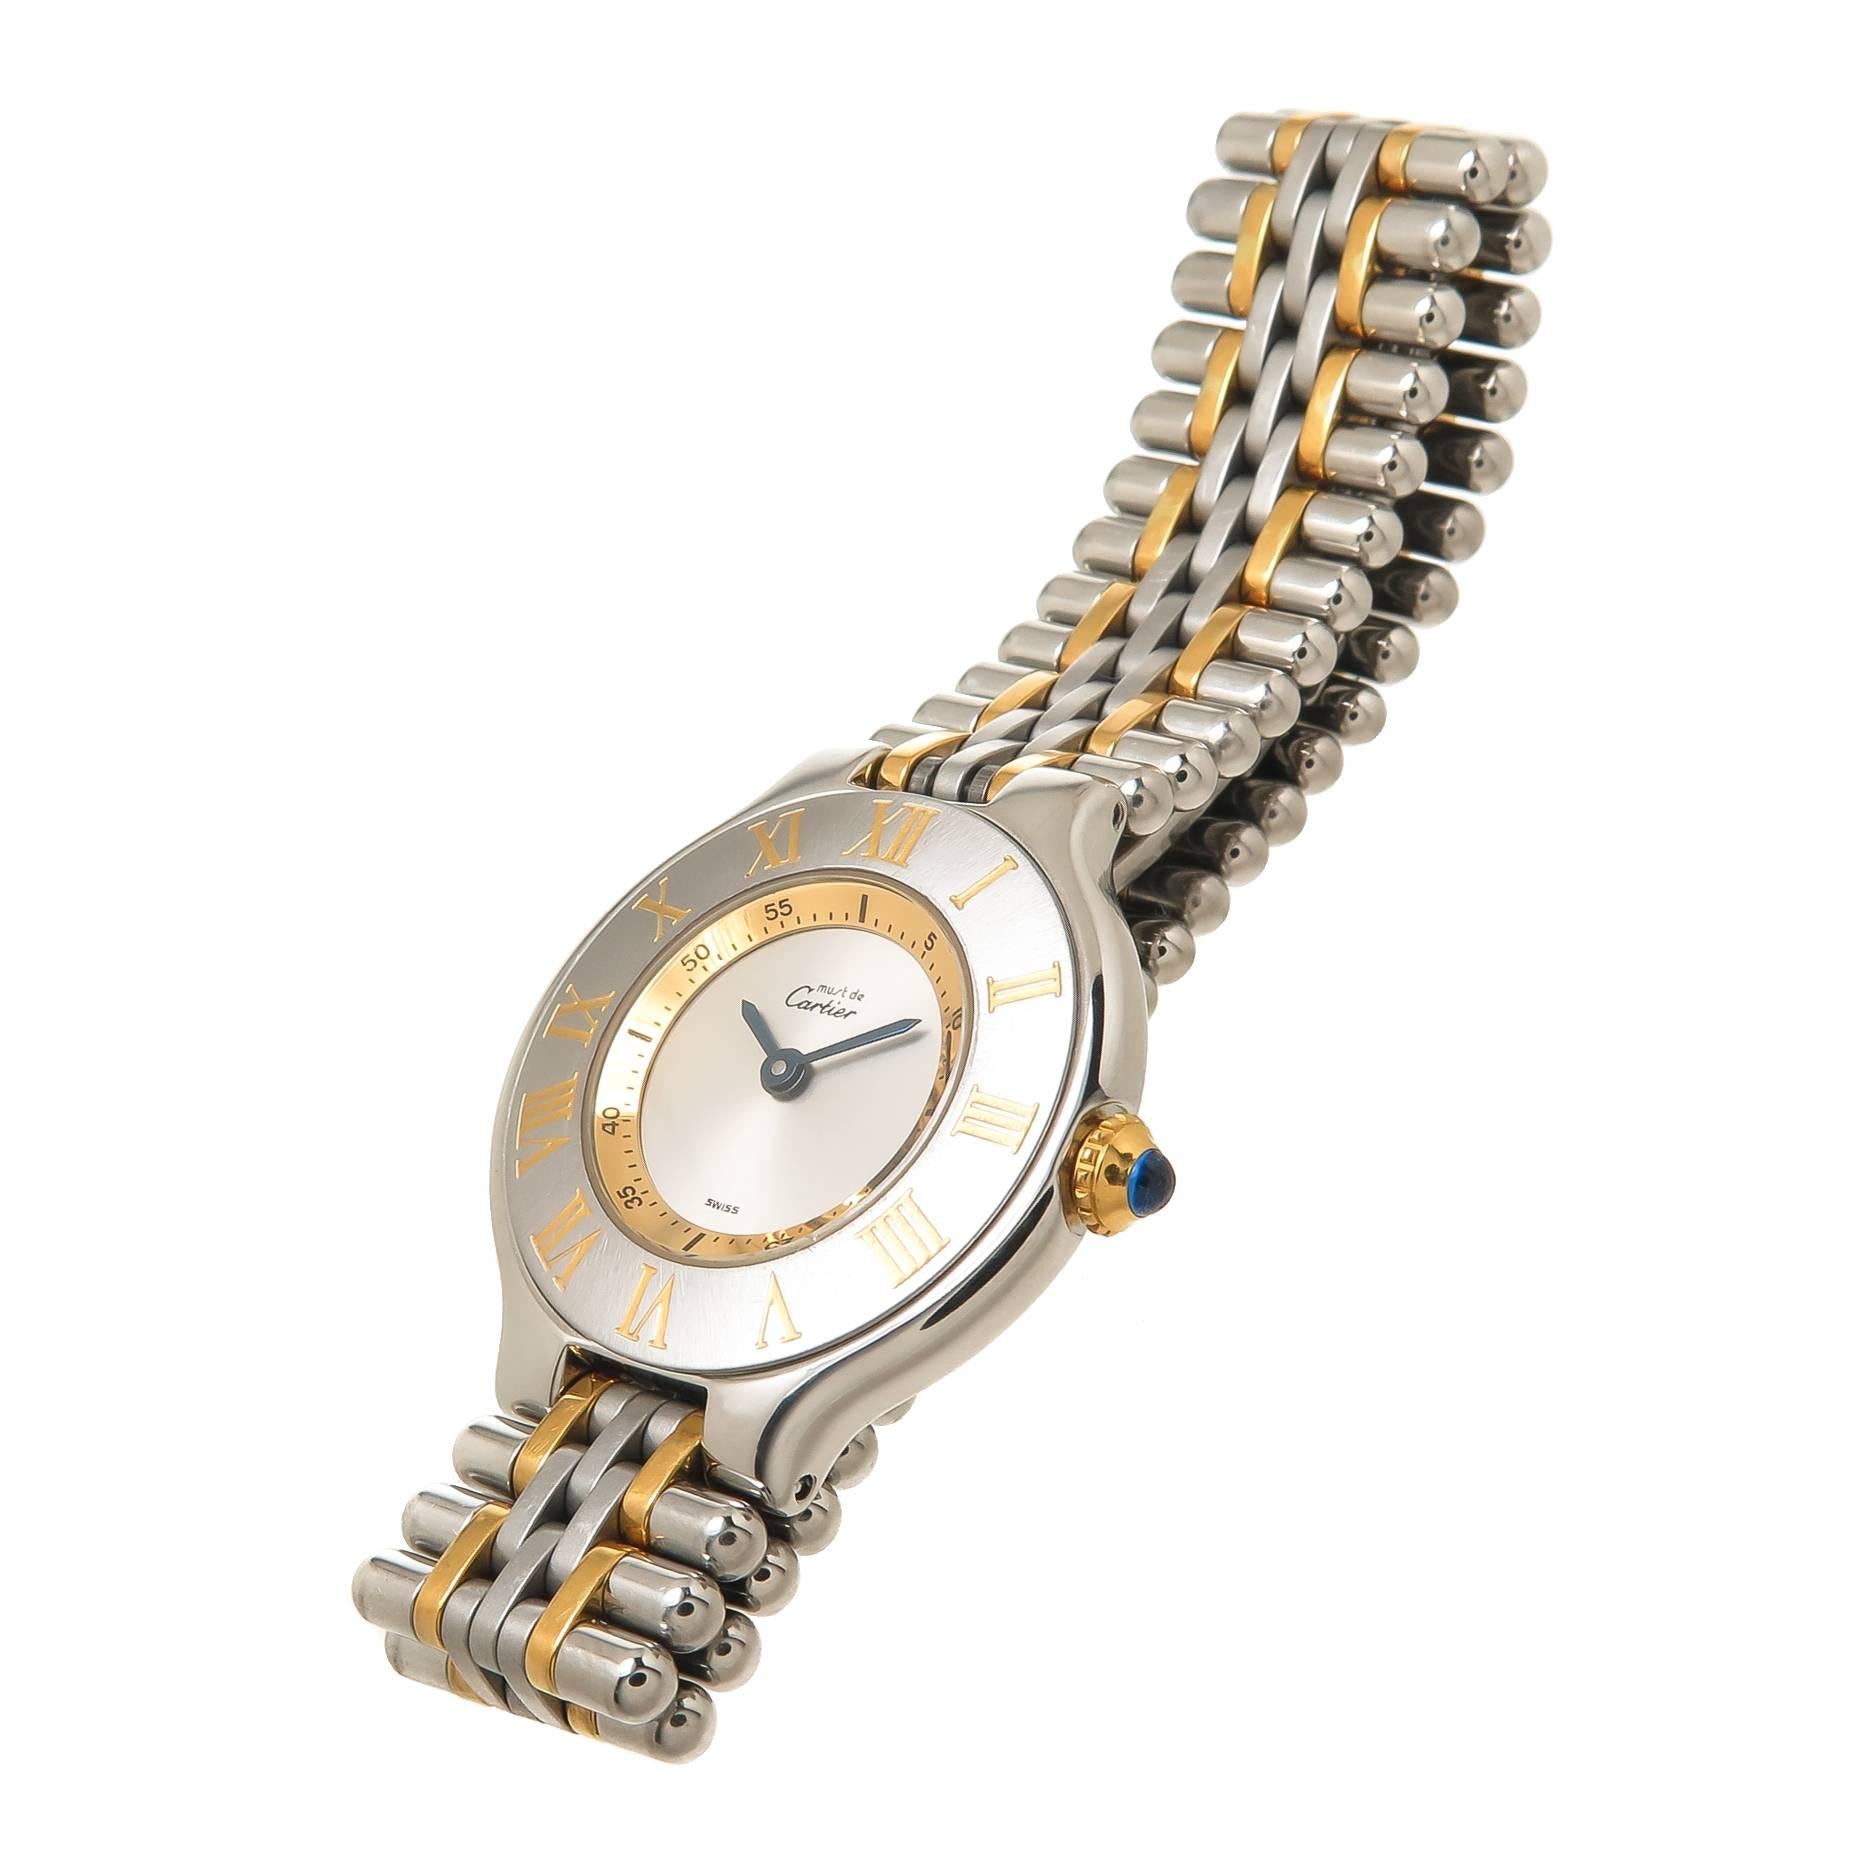 Circa 1990s Cartier, Must De Cartier 21 Ladies Wrist watch, 28 MM Stainless Steel with Gold accents case and a Gold crown set with a sapphire. Quartz Movement, Silver Dial. 9/16 inch wide Steel and Gold link bracelet with Deployment clasp. Total